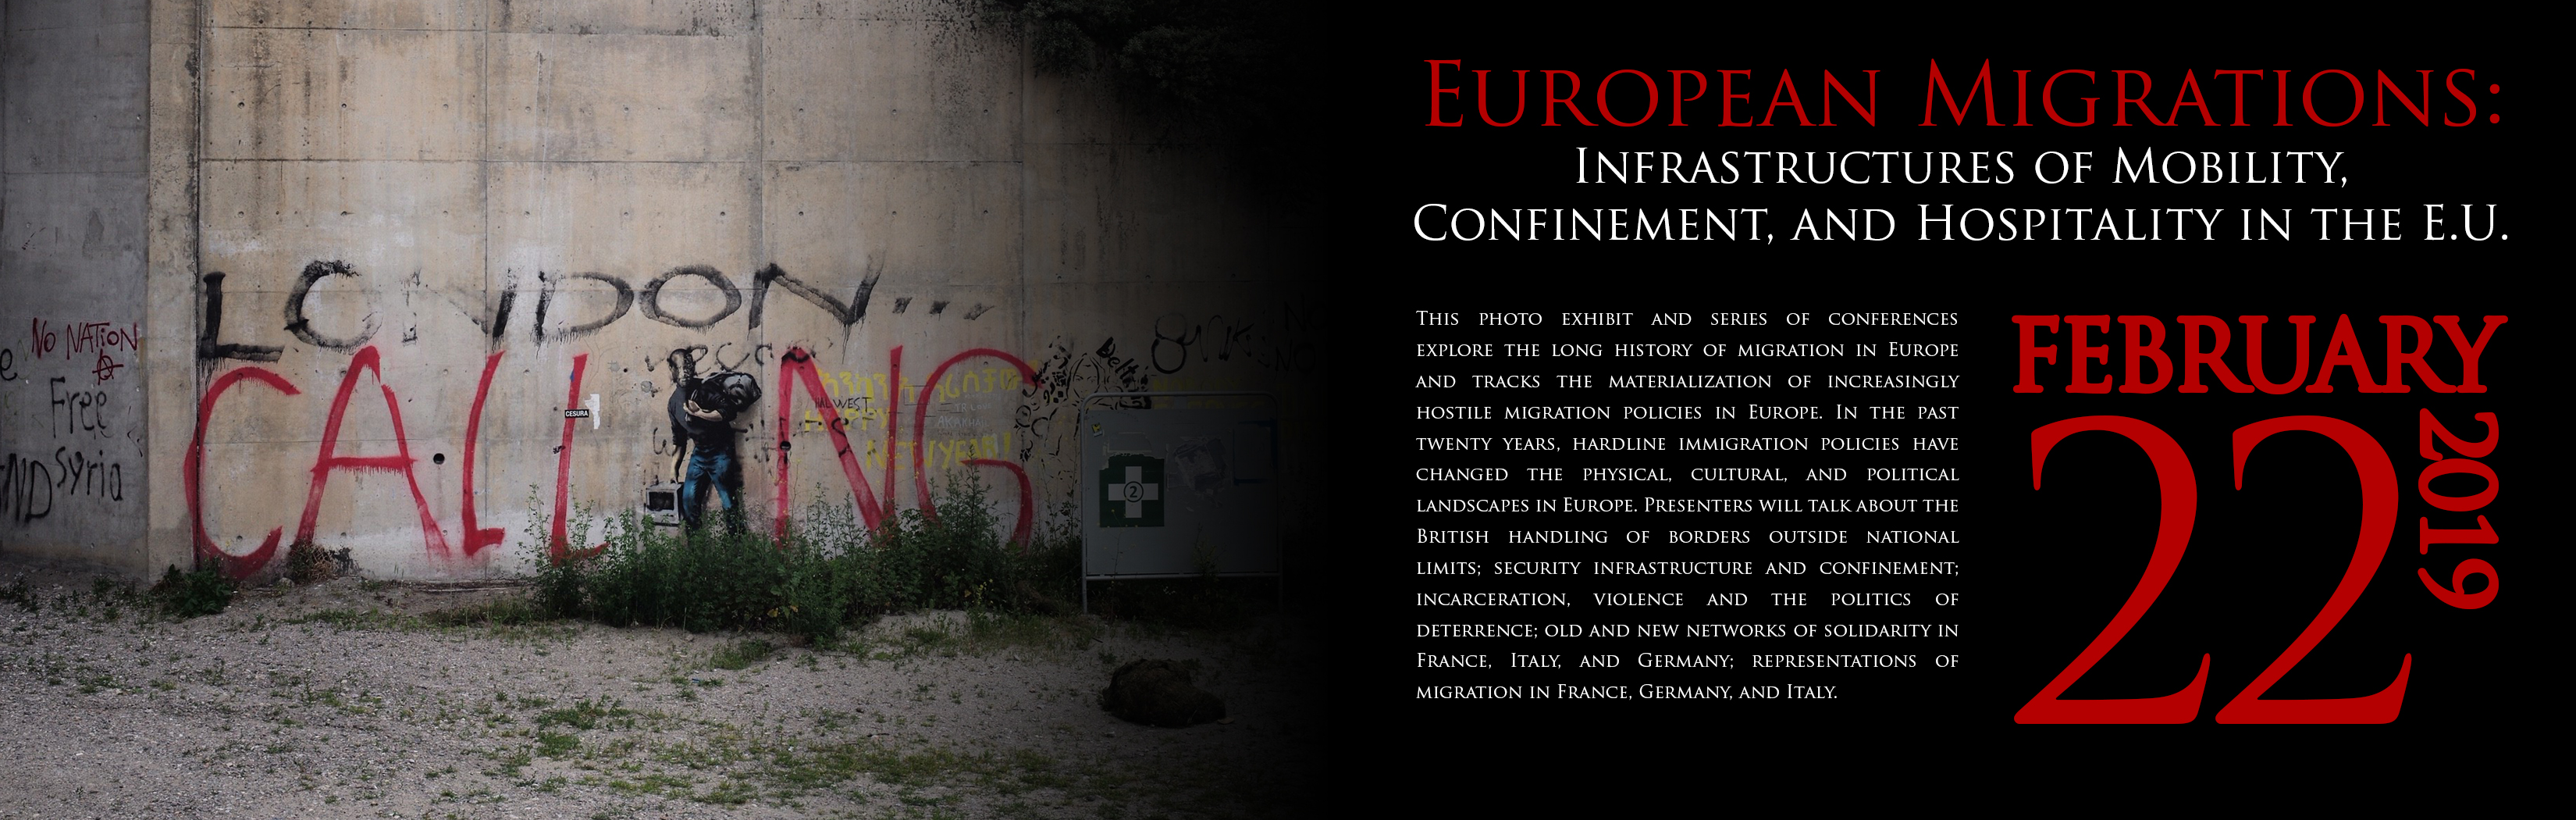 European Migrations: Infrastructures of Mobility, Confinement, and Hospitality in the E.U.